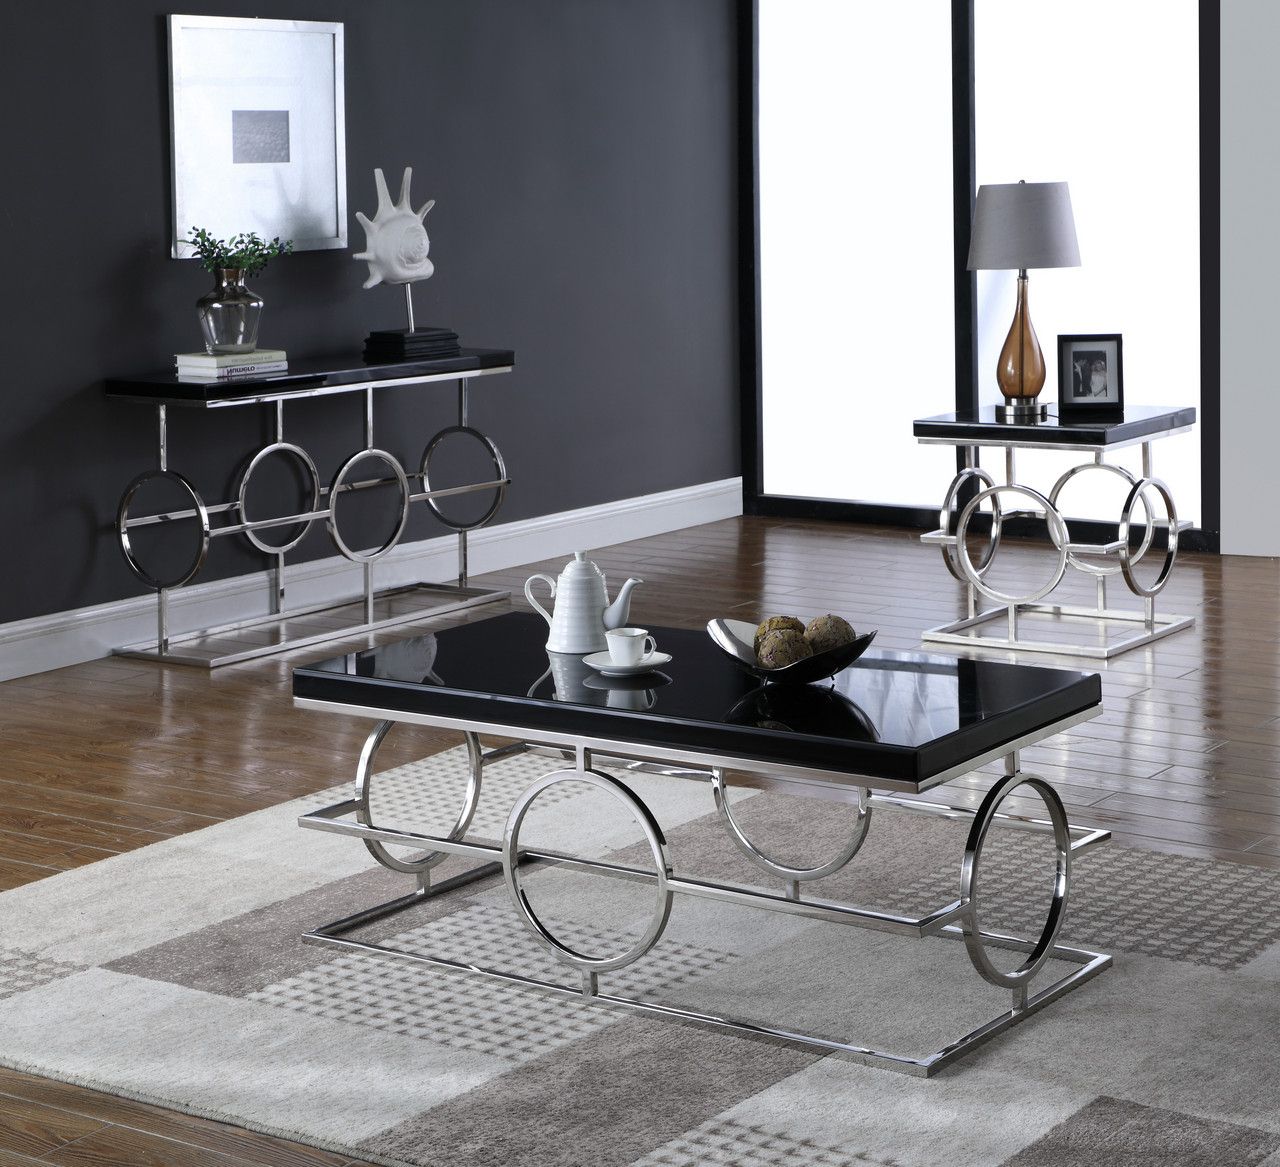 Cesario Modern Black Glass Top Coffee Table W/shaped With Regard To Recent Silver Stainless Steel Coffee Tables (Gallery 1 of 20)